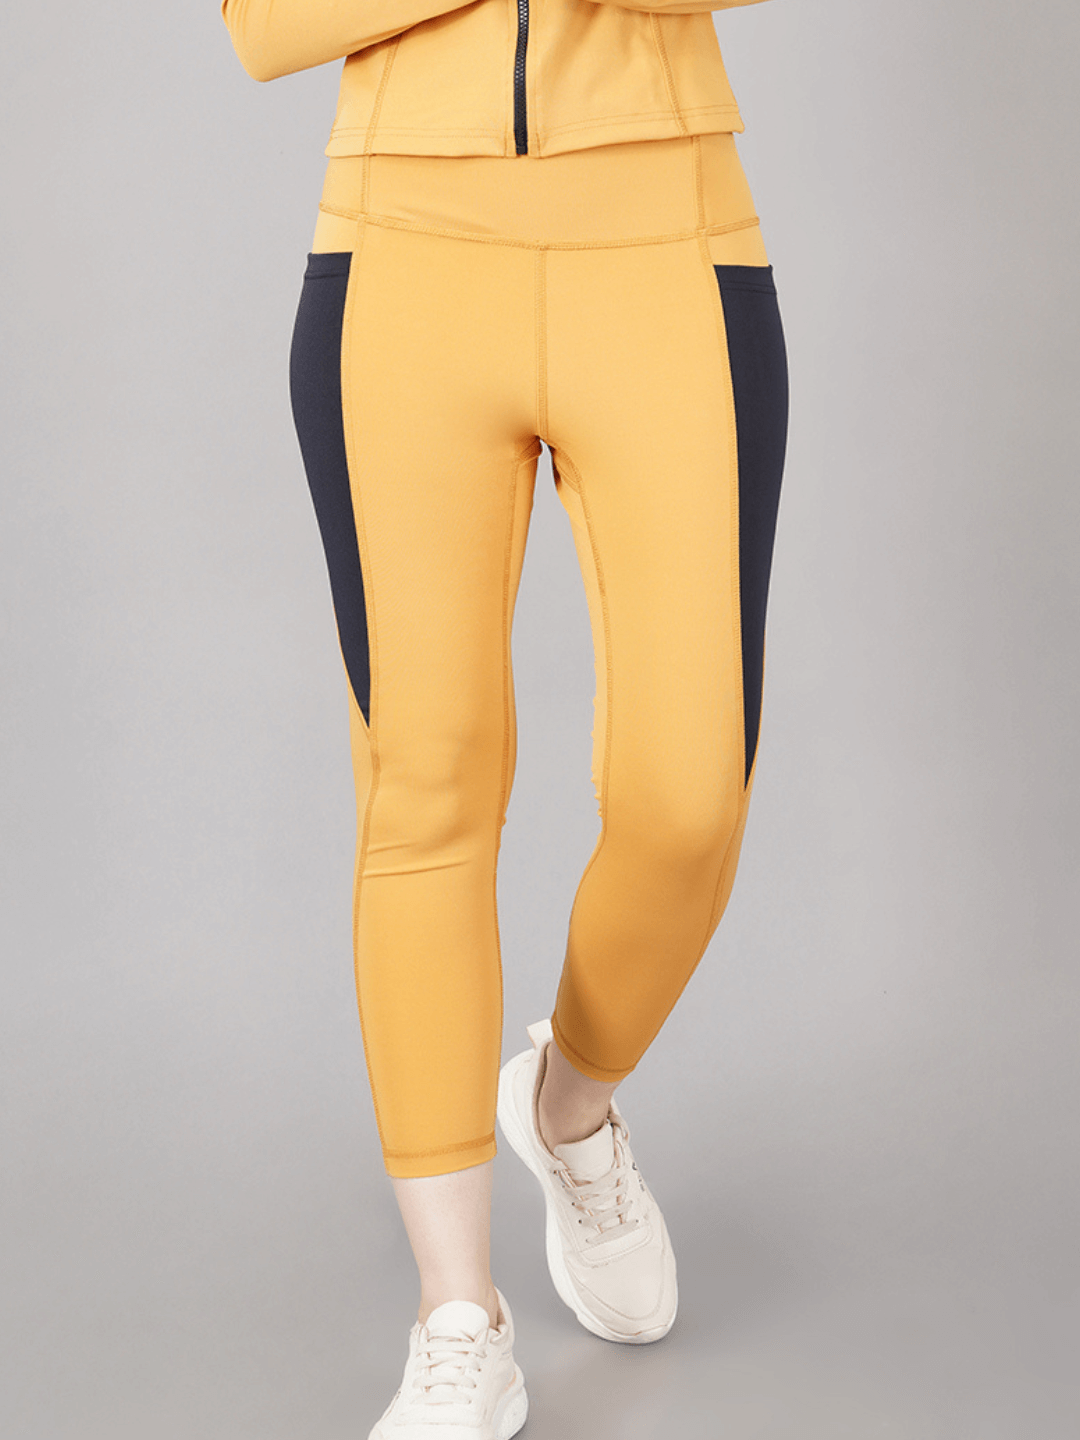 Mossimo Supply Co. Yellow Athletic Leggings for Women